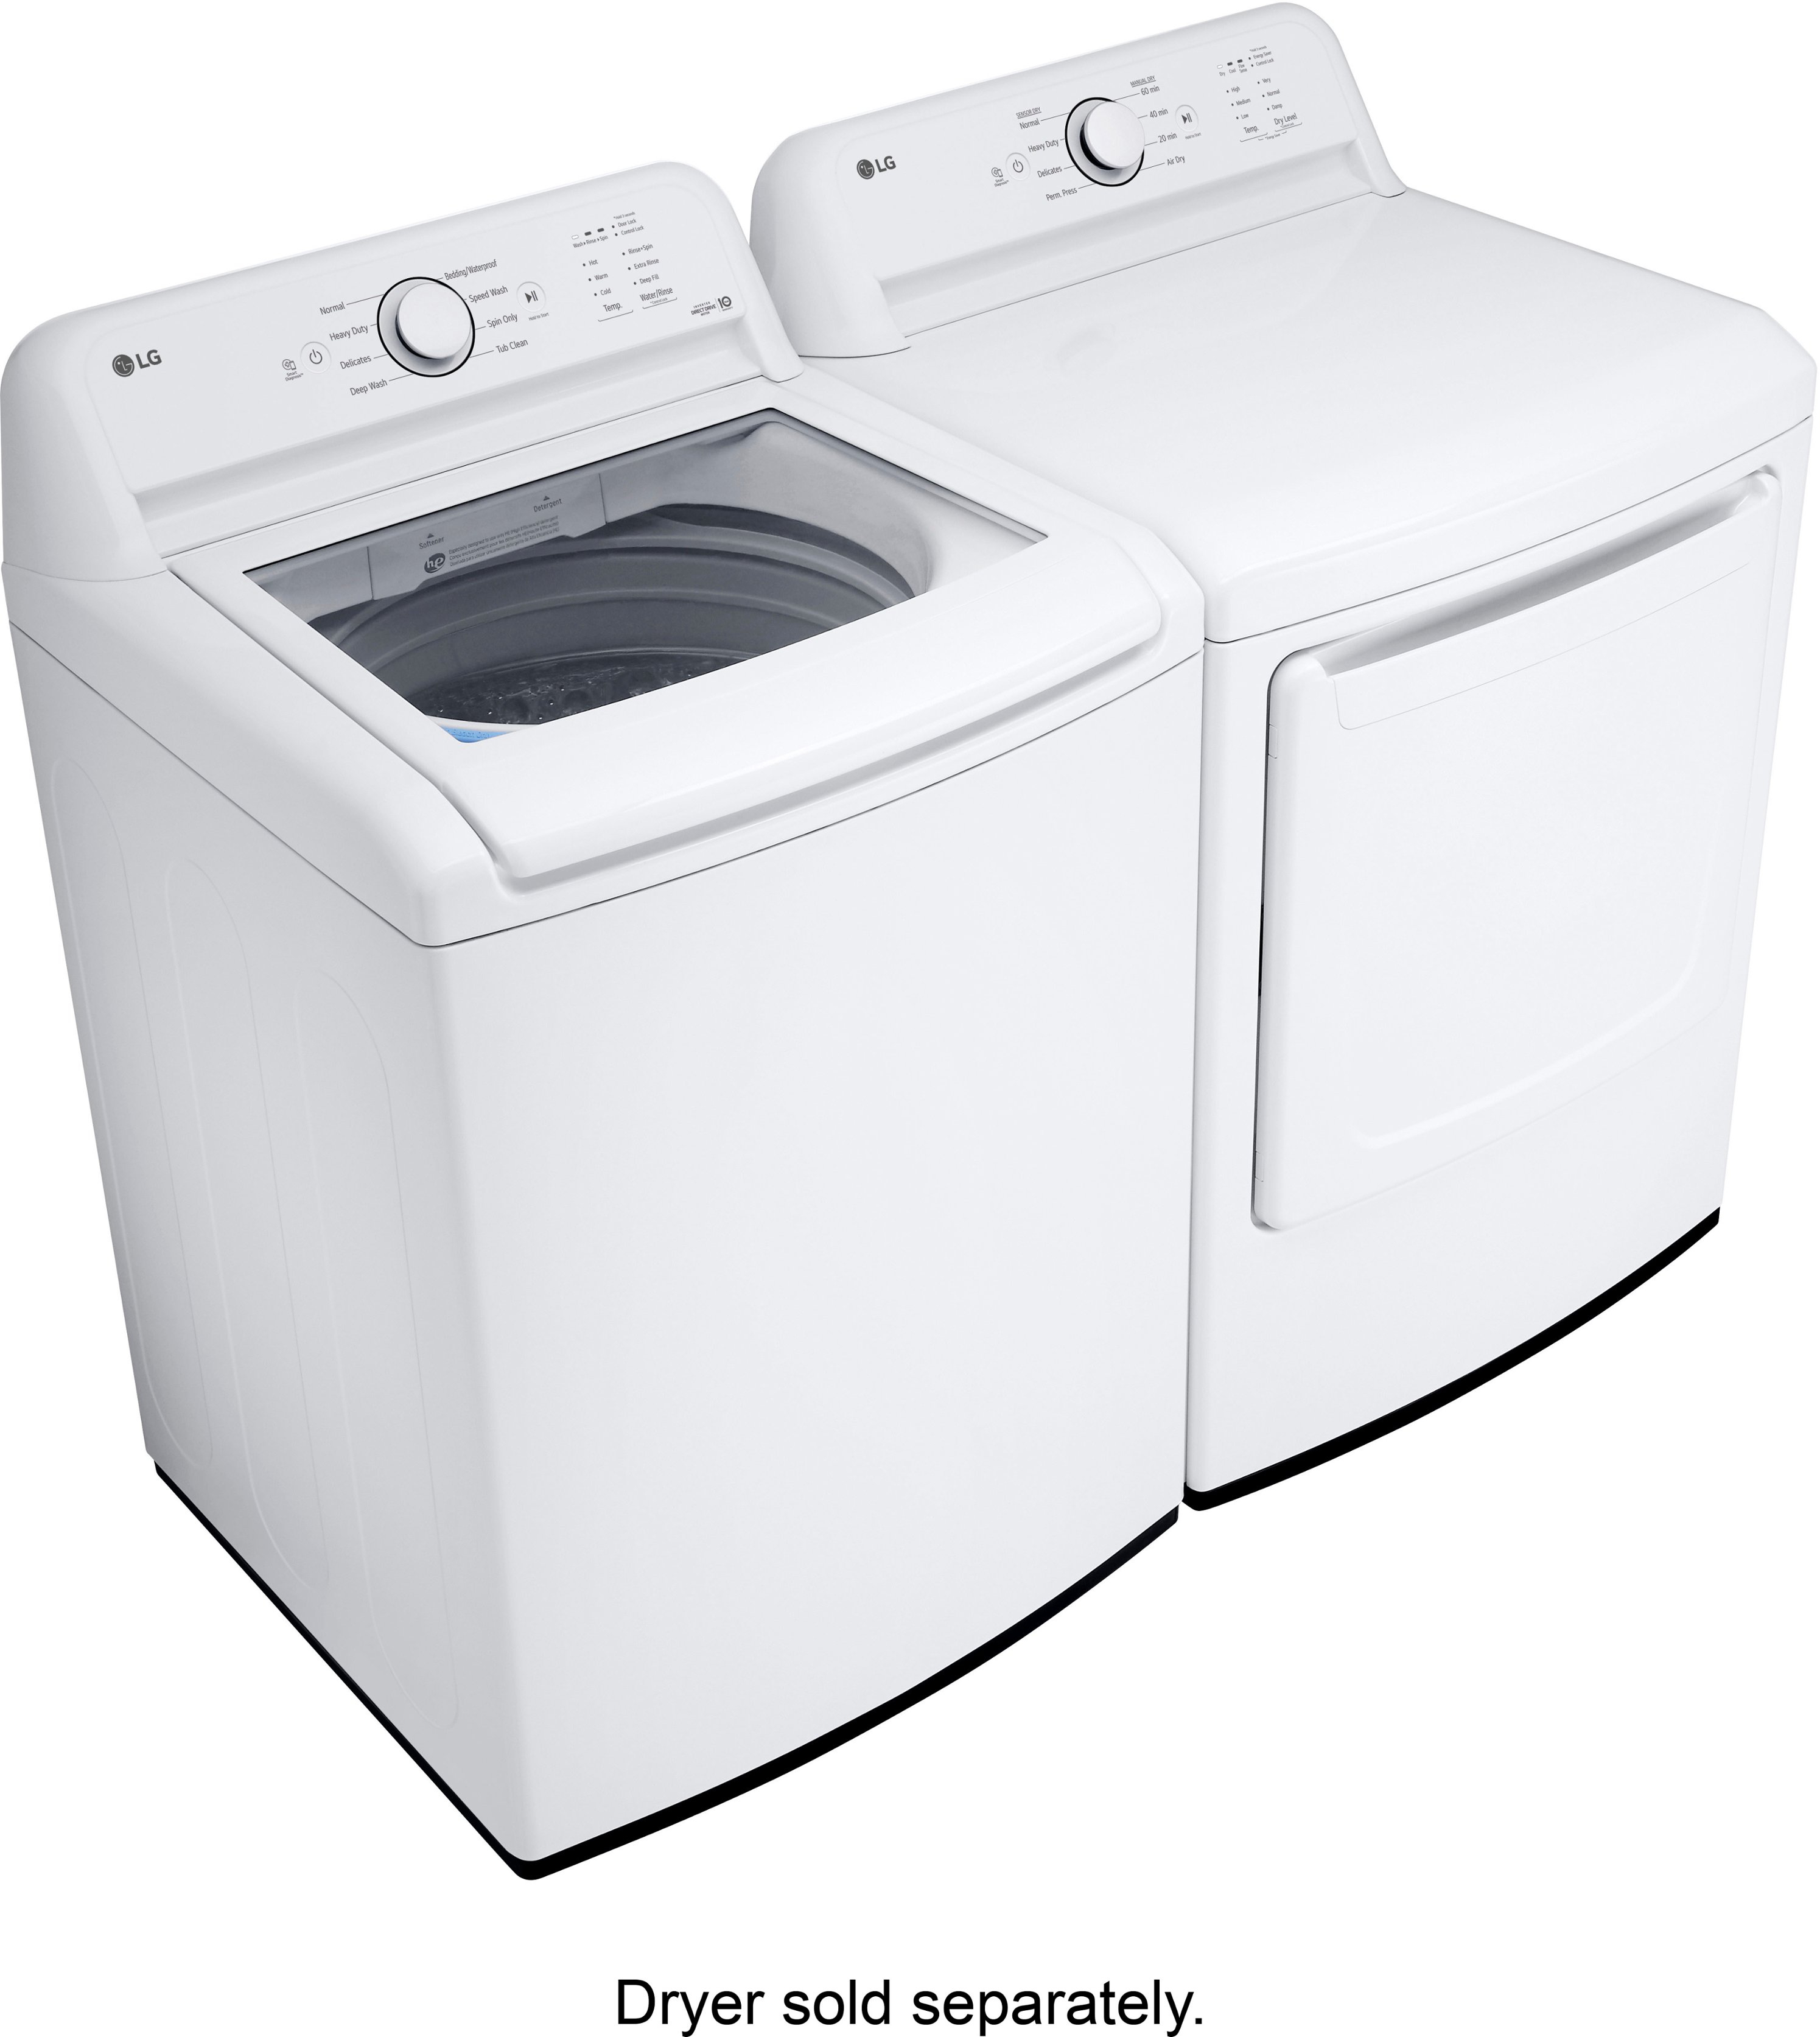 LG 4.8 Cu. Ft. High-Efficiency Smart Top Load Washer with 4 Way Agitator  White WT7155CW - Best Buy